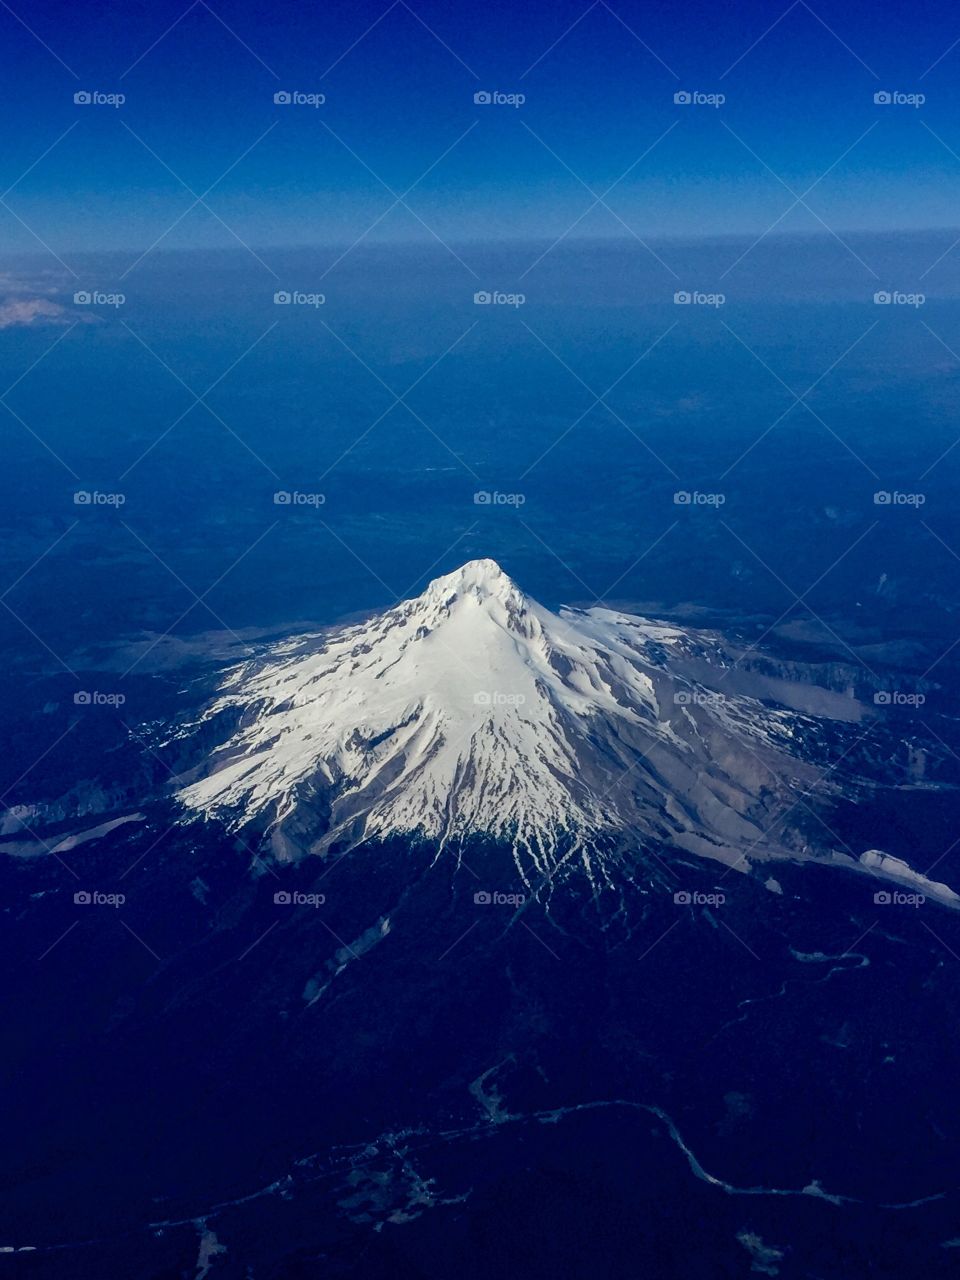 Flying over Mt. Hood. Taken while flying over mt. Hood on American Airlines. 